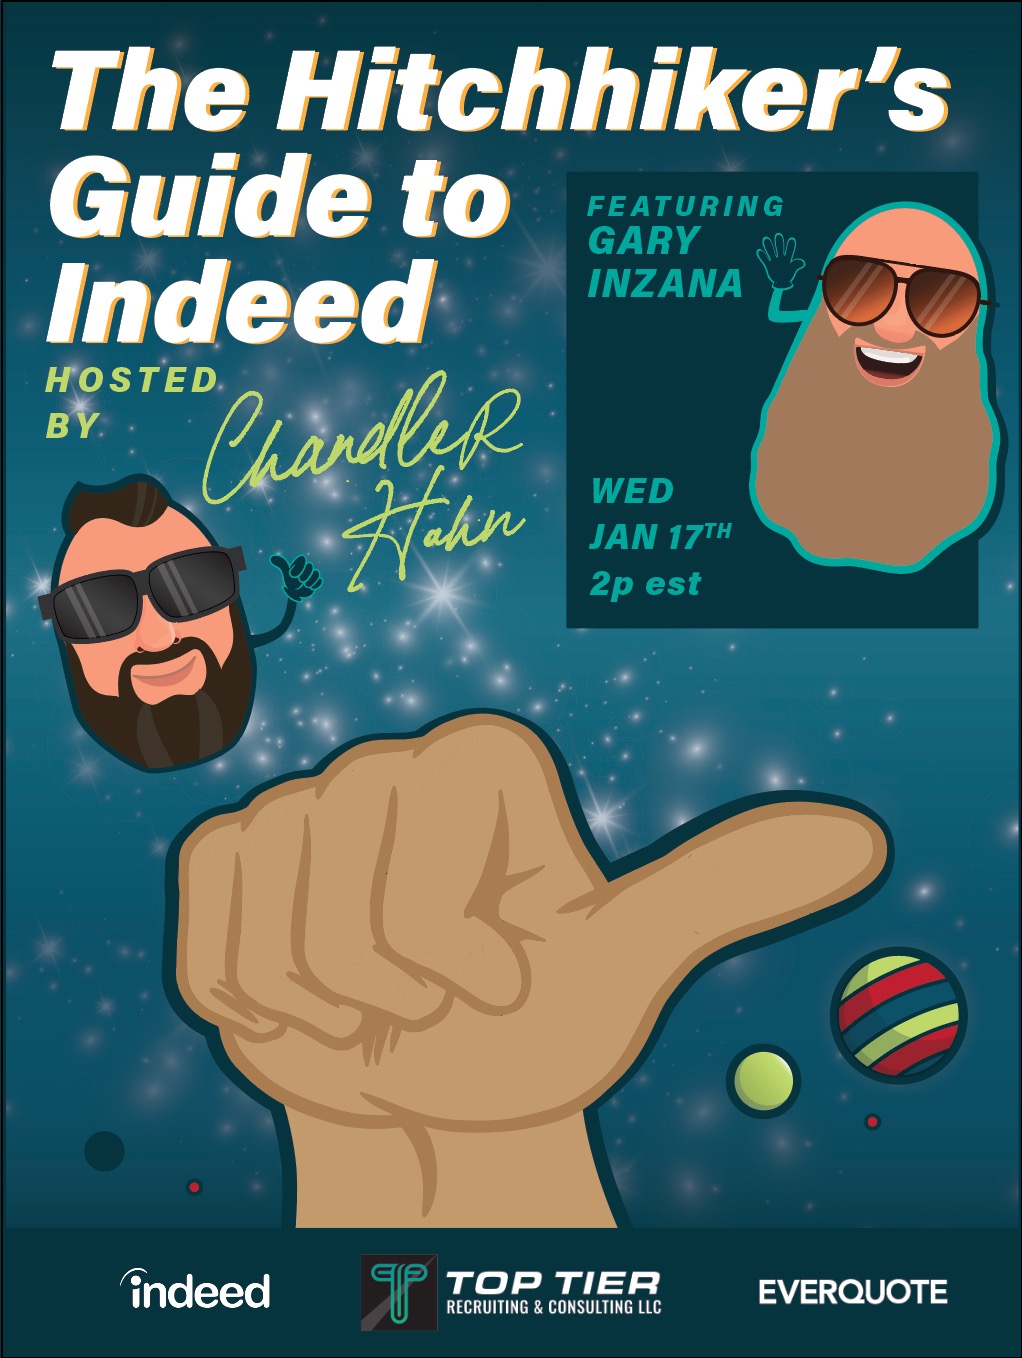 The Hitchhiker’s Guide to Indeed (for Insurance Agents) with Gary Inzana